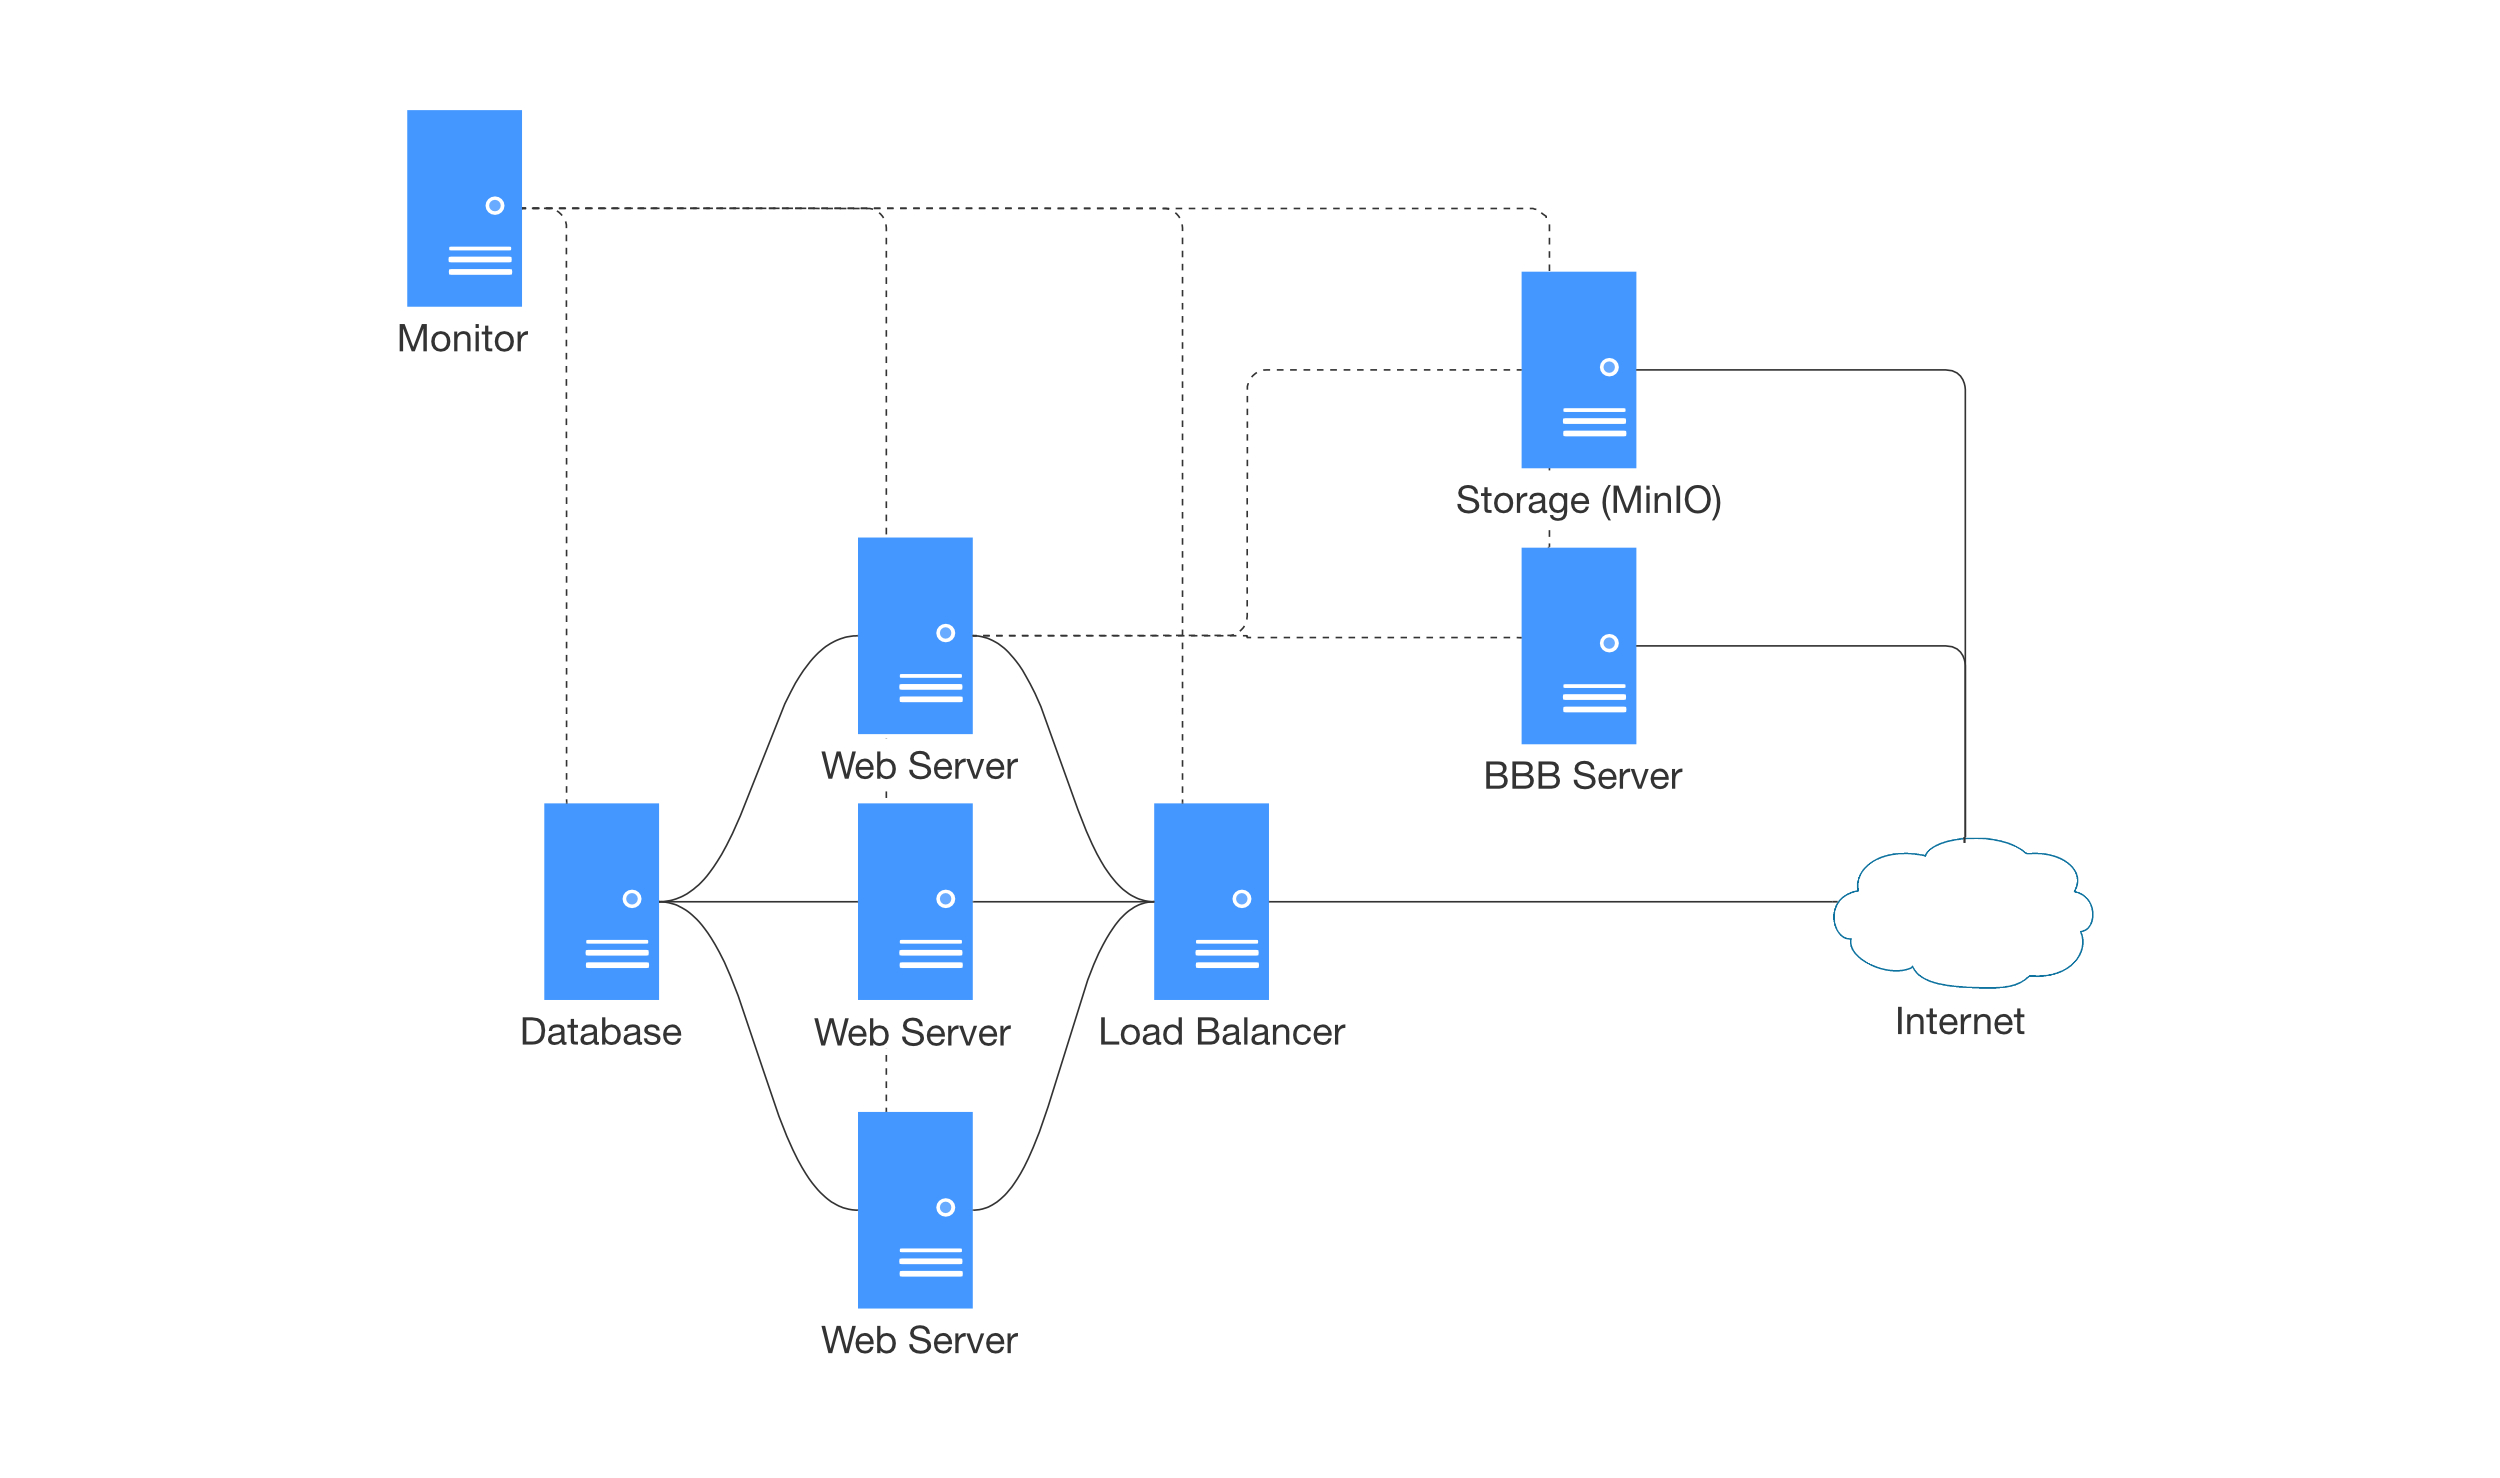 Server Infrastructure Diagram, showing how Web, Database, Load Balancing, Monitor, Storage, and BigBlueButton Server are connected.